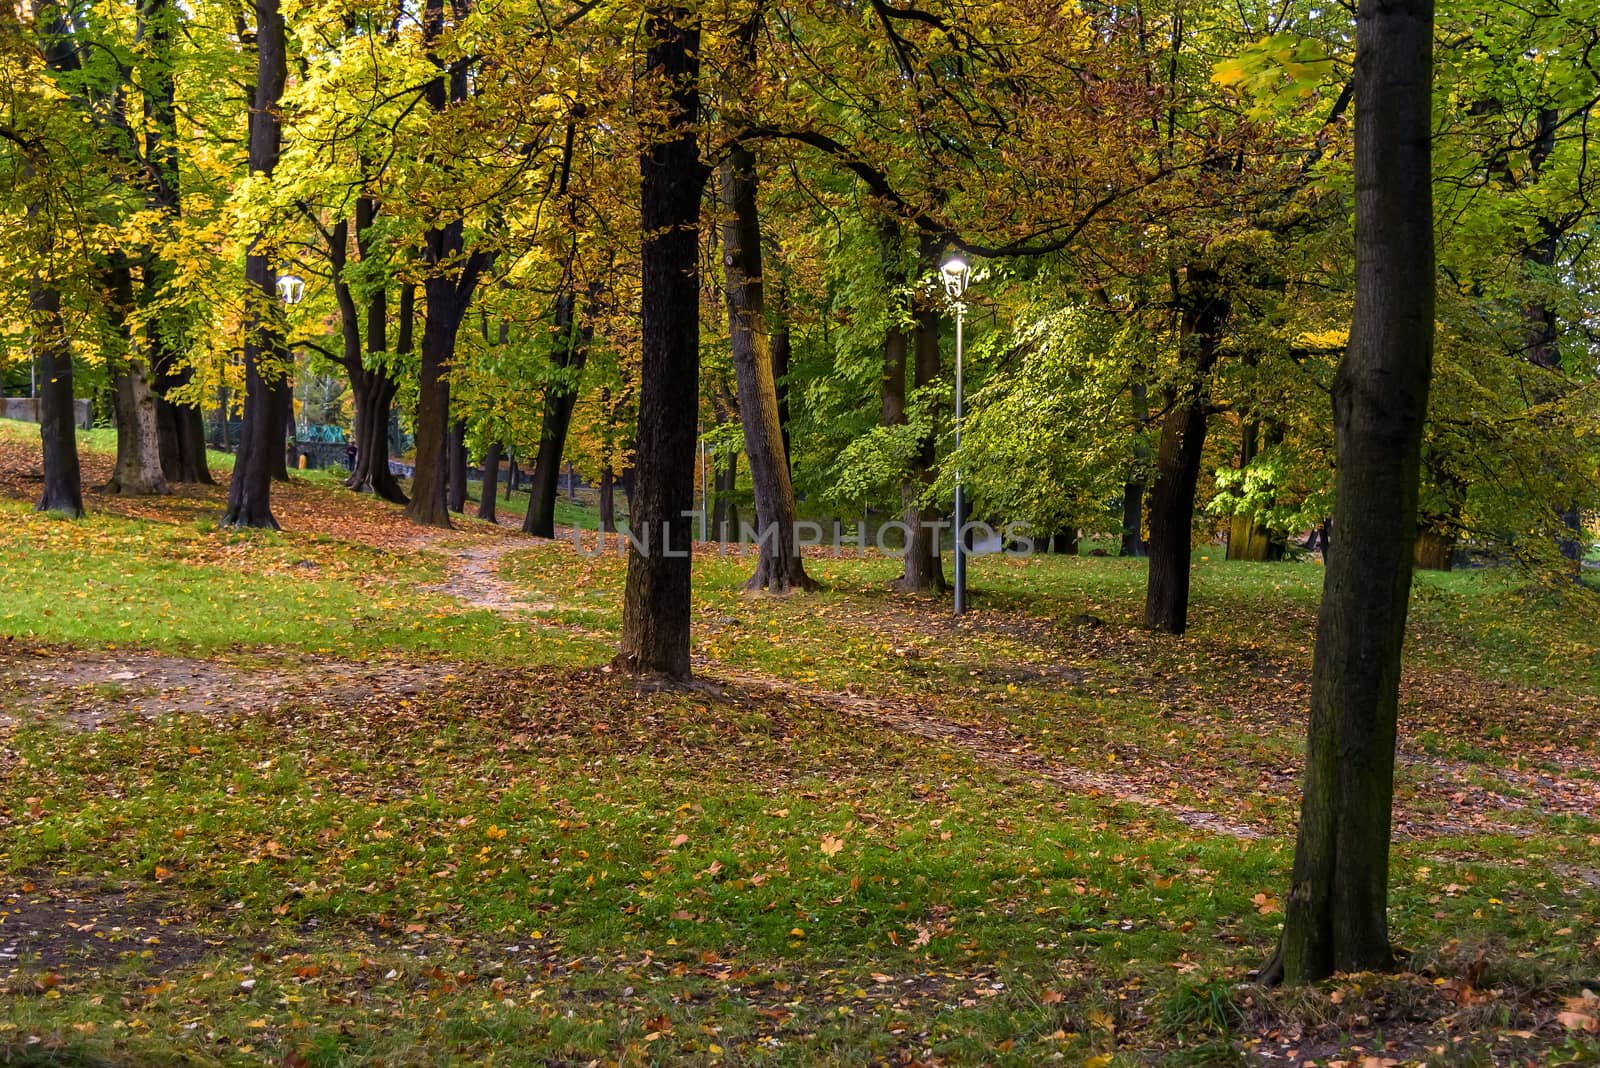 Evening view of the park in autumn by mkos83